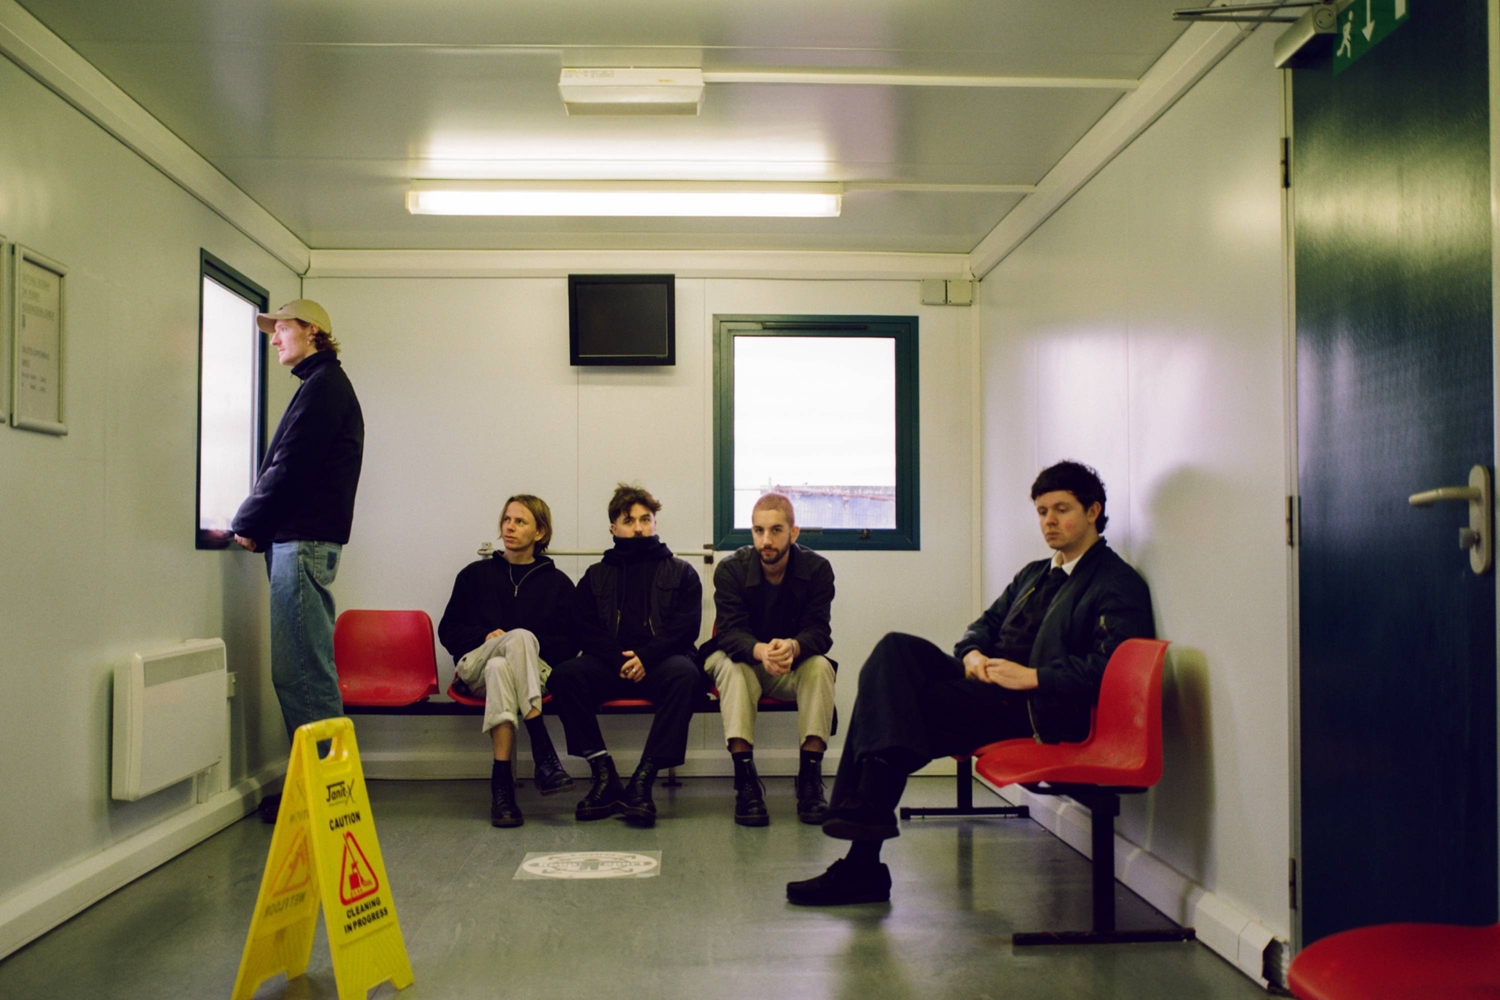 Humour release new single 'The Halfwit'